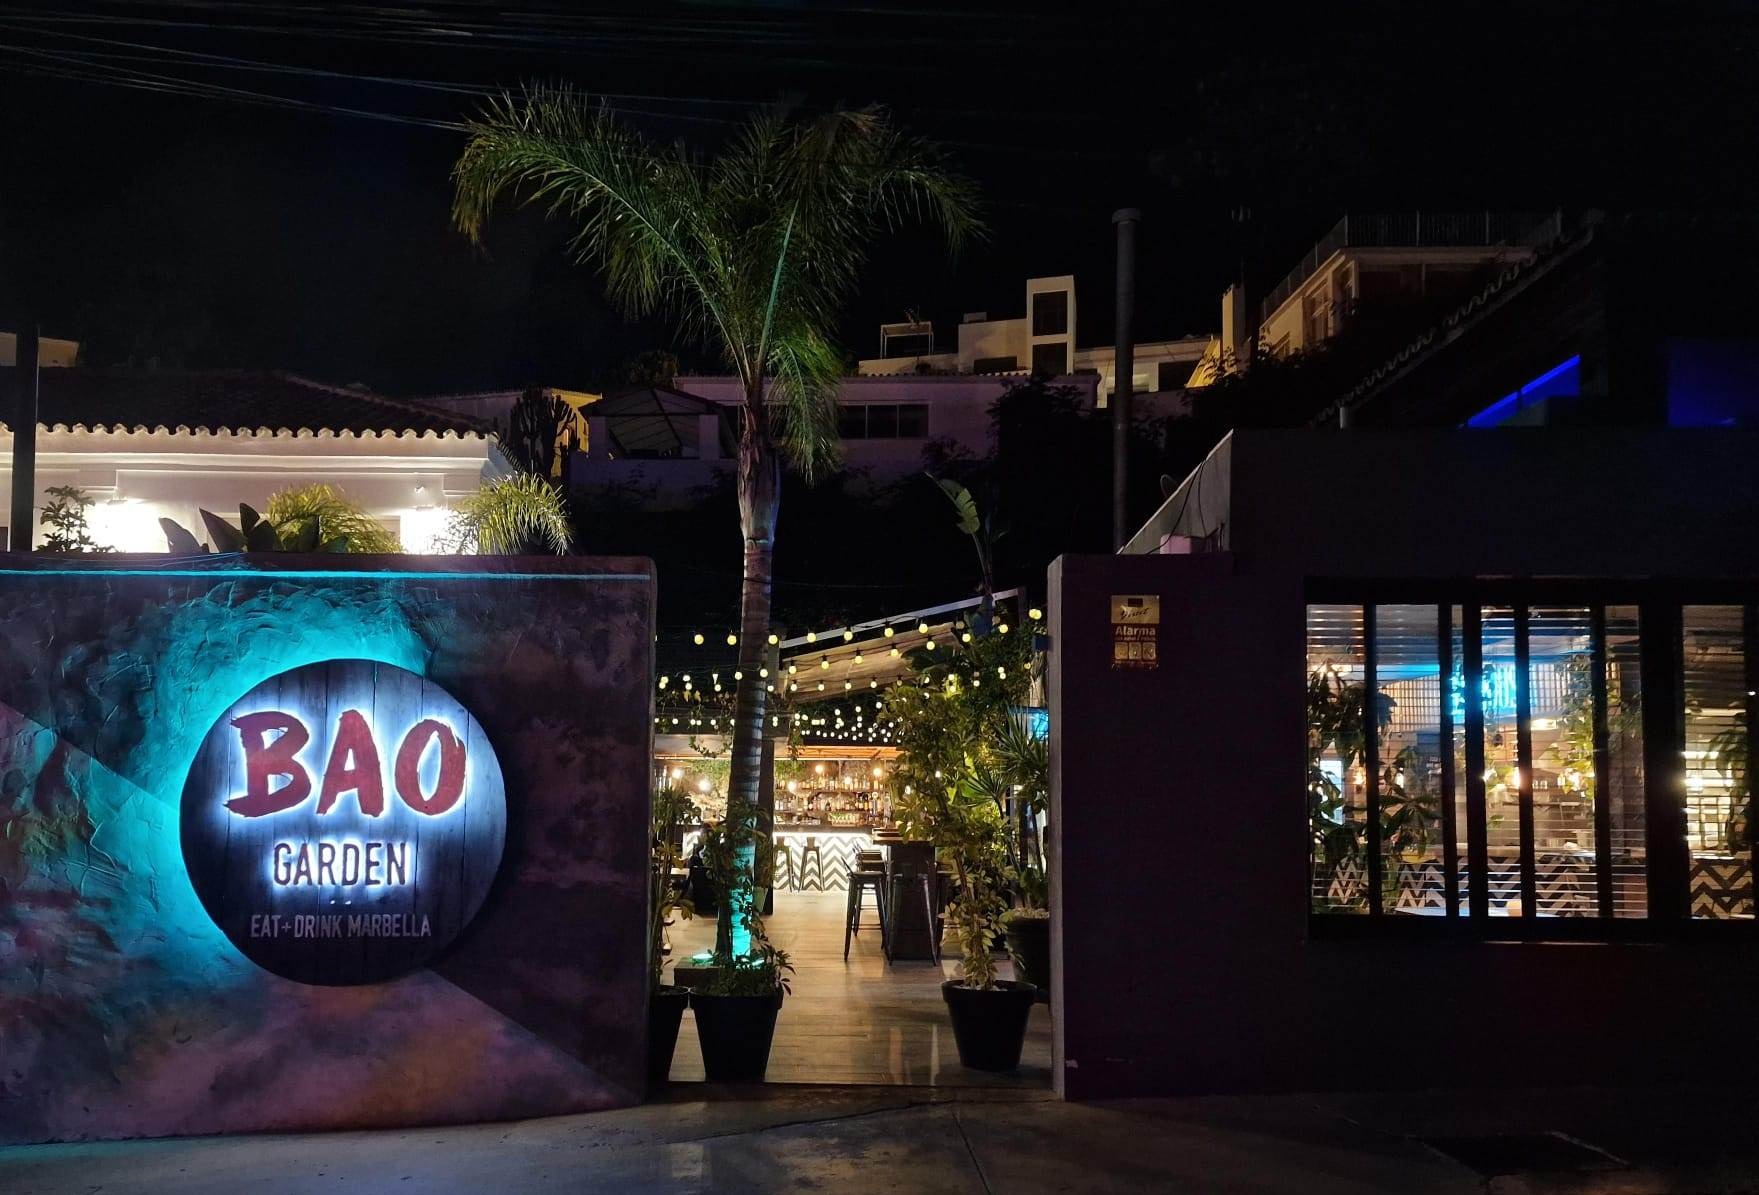 BAO GARDEN IS BACK! Enjoy freshly made creative street food at 30% off! If you haven't tried out one of Nueva Andalucía's most popular bar/restaurants, BAO GARDEN, why not try it at this promotional price for a limited time only?! THREE tantalising baos of your choice and TWO drinks for just 22 Euros! Normally 31,50 Euros! Bao Garden is famous for its delicious creative food, lively atmosphere, contemporary décor and cosy setting. Don't miss out on this exciting new deal - available for a limited time only!